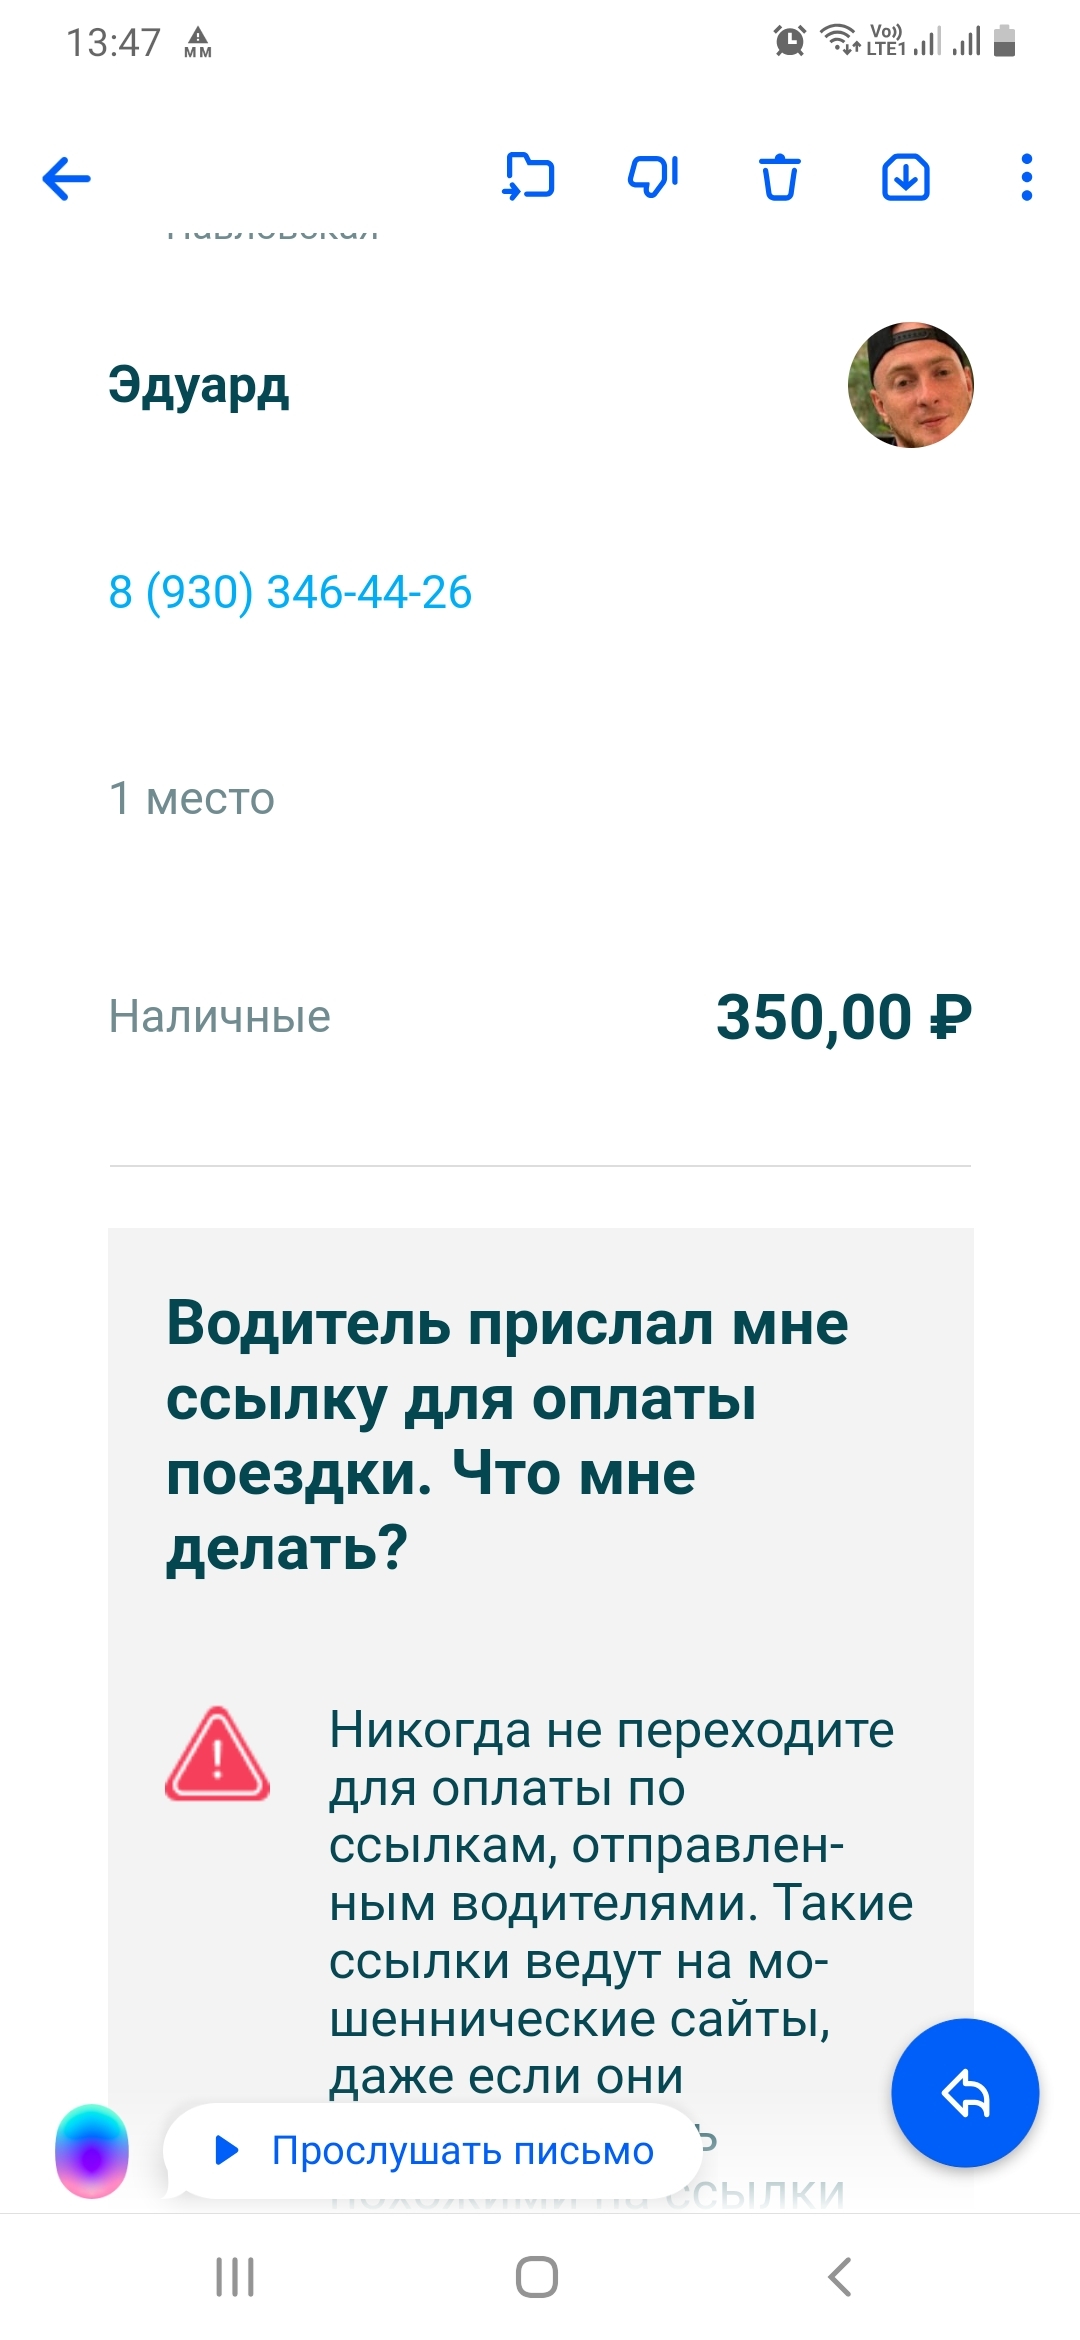 Reply to the post Tell me what's going on with bla bla car? - Krasnodar, Drive, Blablacar, Taxi driver, Illegal business, Blocking, Longpost, Reply to post